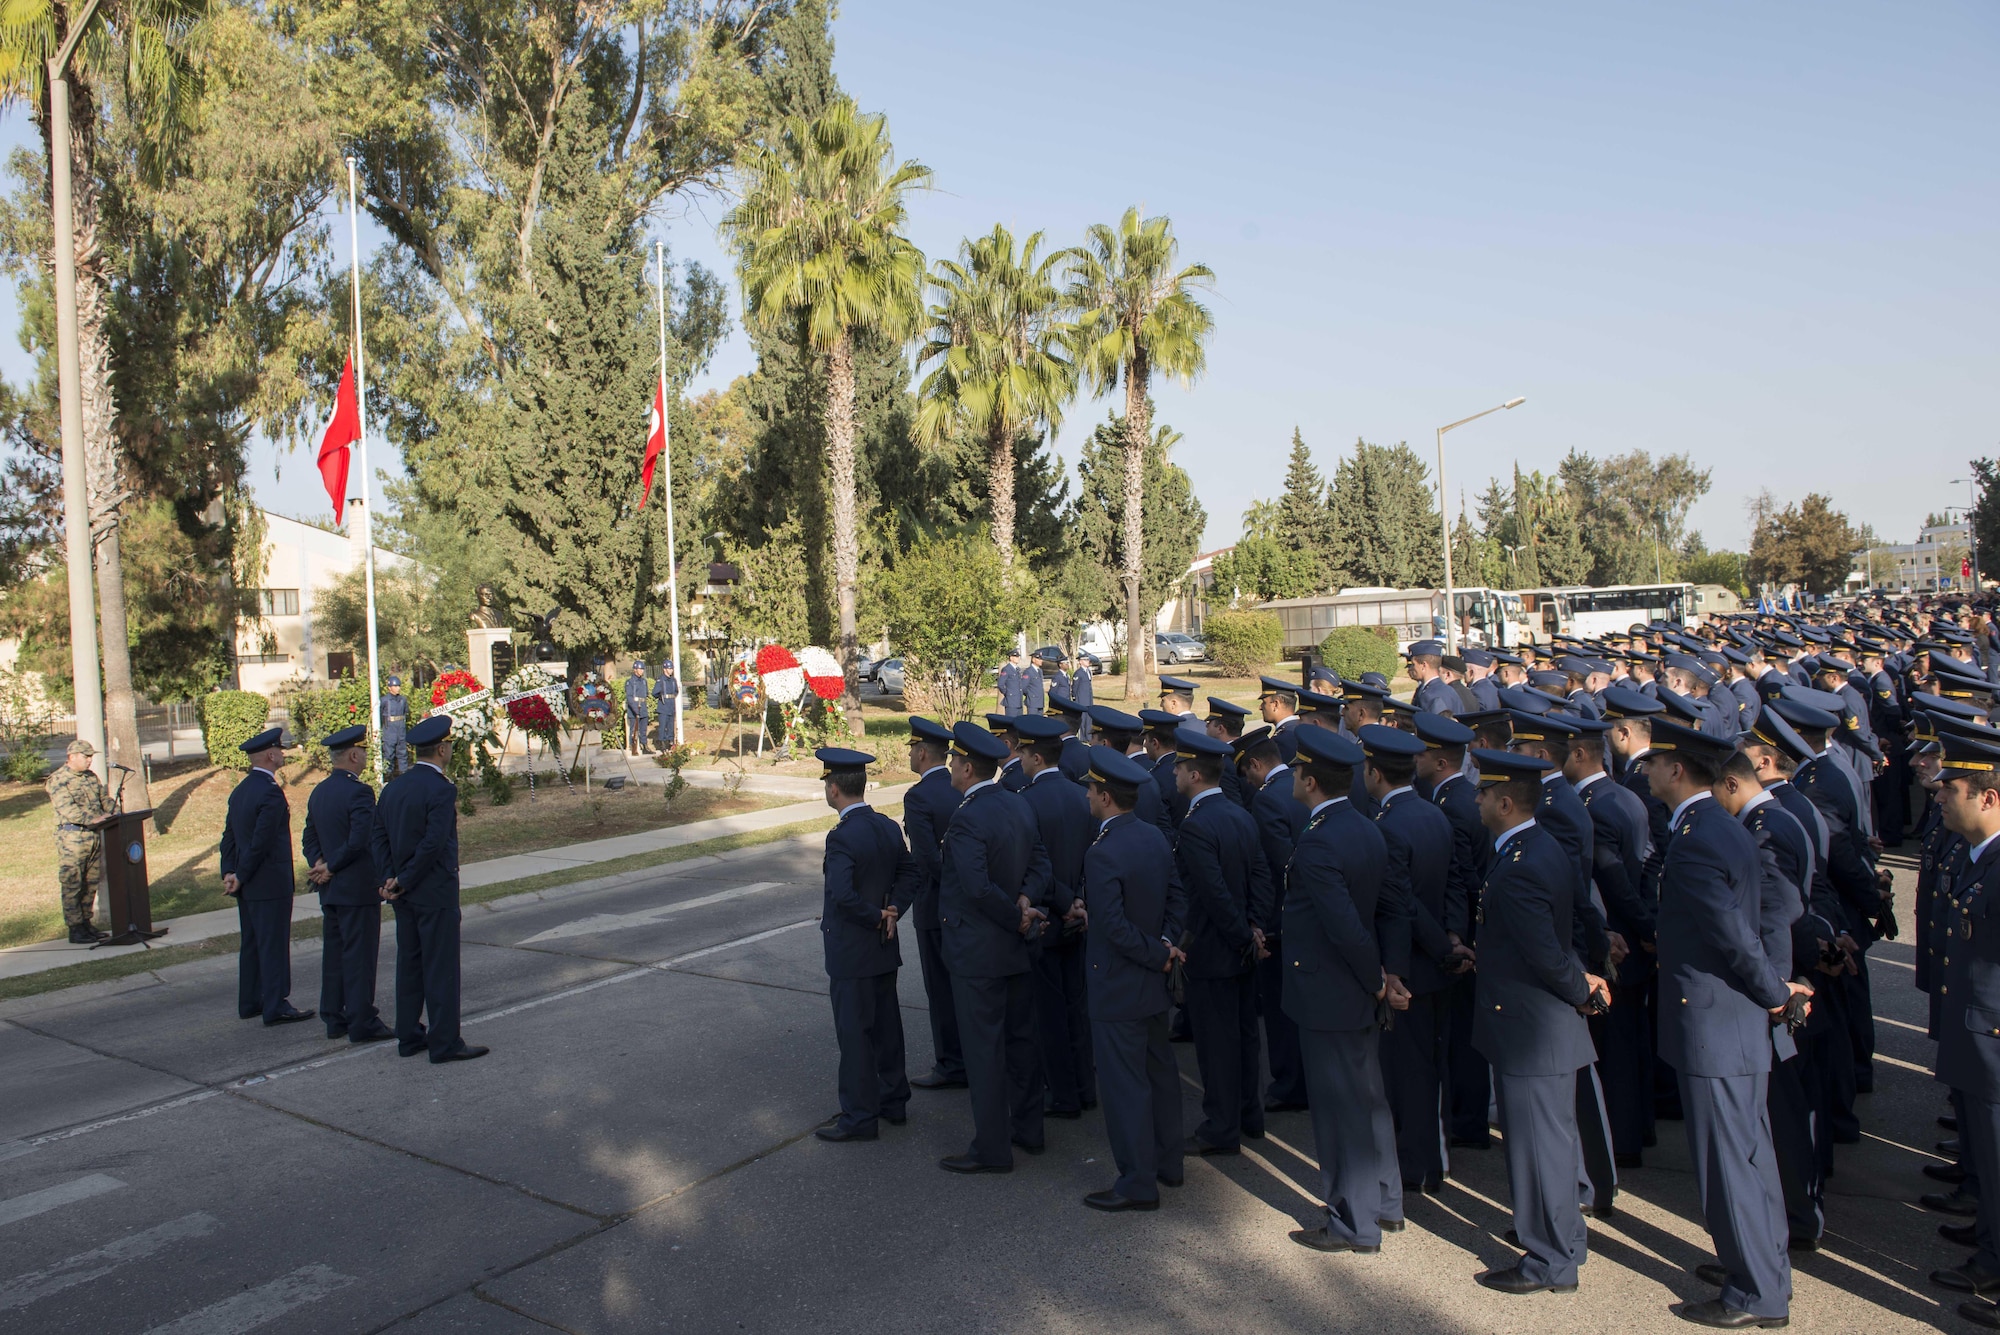 Turkish Air Force members assigned to the 10th Tanker Base and U.S. service members stand at parade rest during a memorial ceremony for Mustafa Kemal Ataturk Nov. 10, 2016, at Incirlik Air Base, Turkey. U.S. and Turkish service members participated in the ceremony to pay tribute and honor Ataturk. (U.S. Air Force photo by Senior Airman John Nieves Camacho)